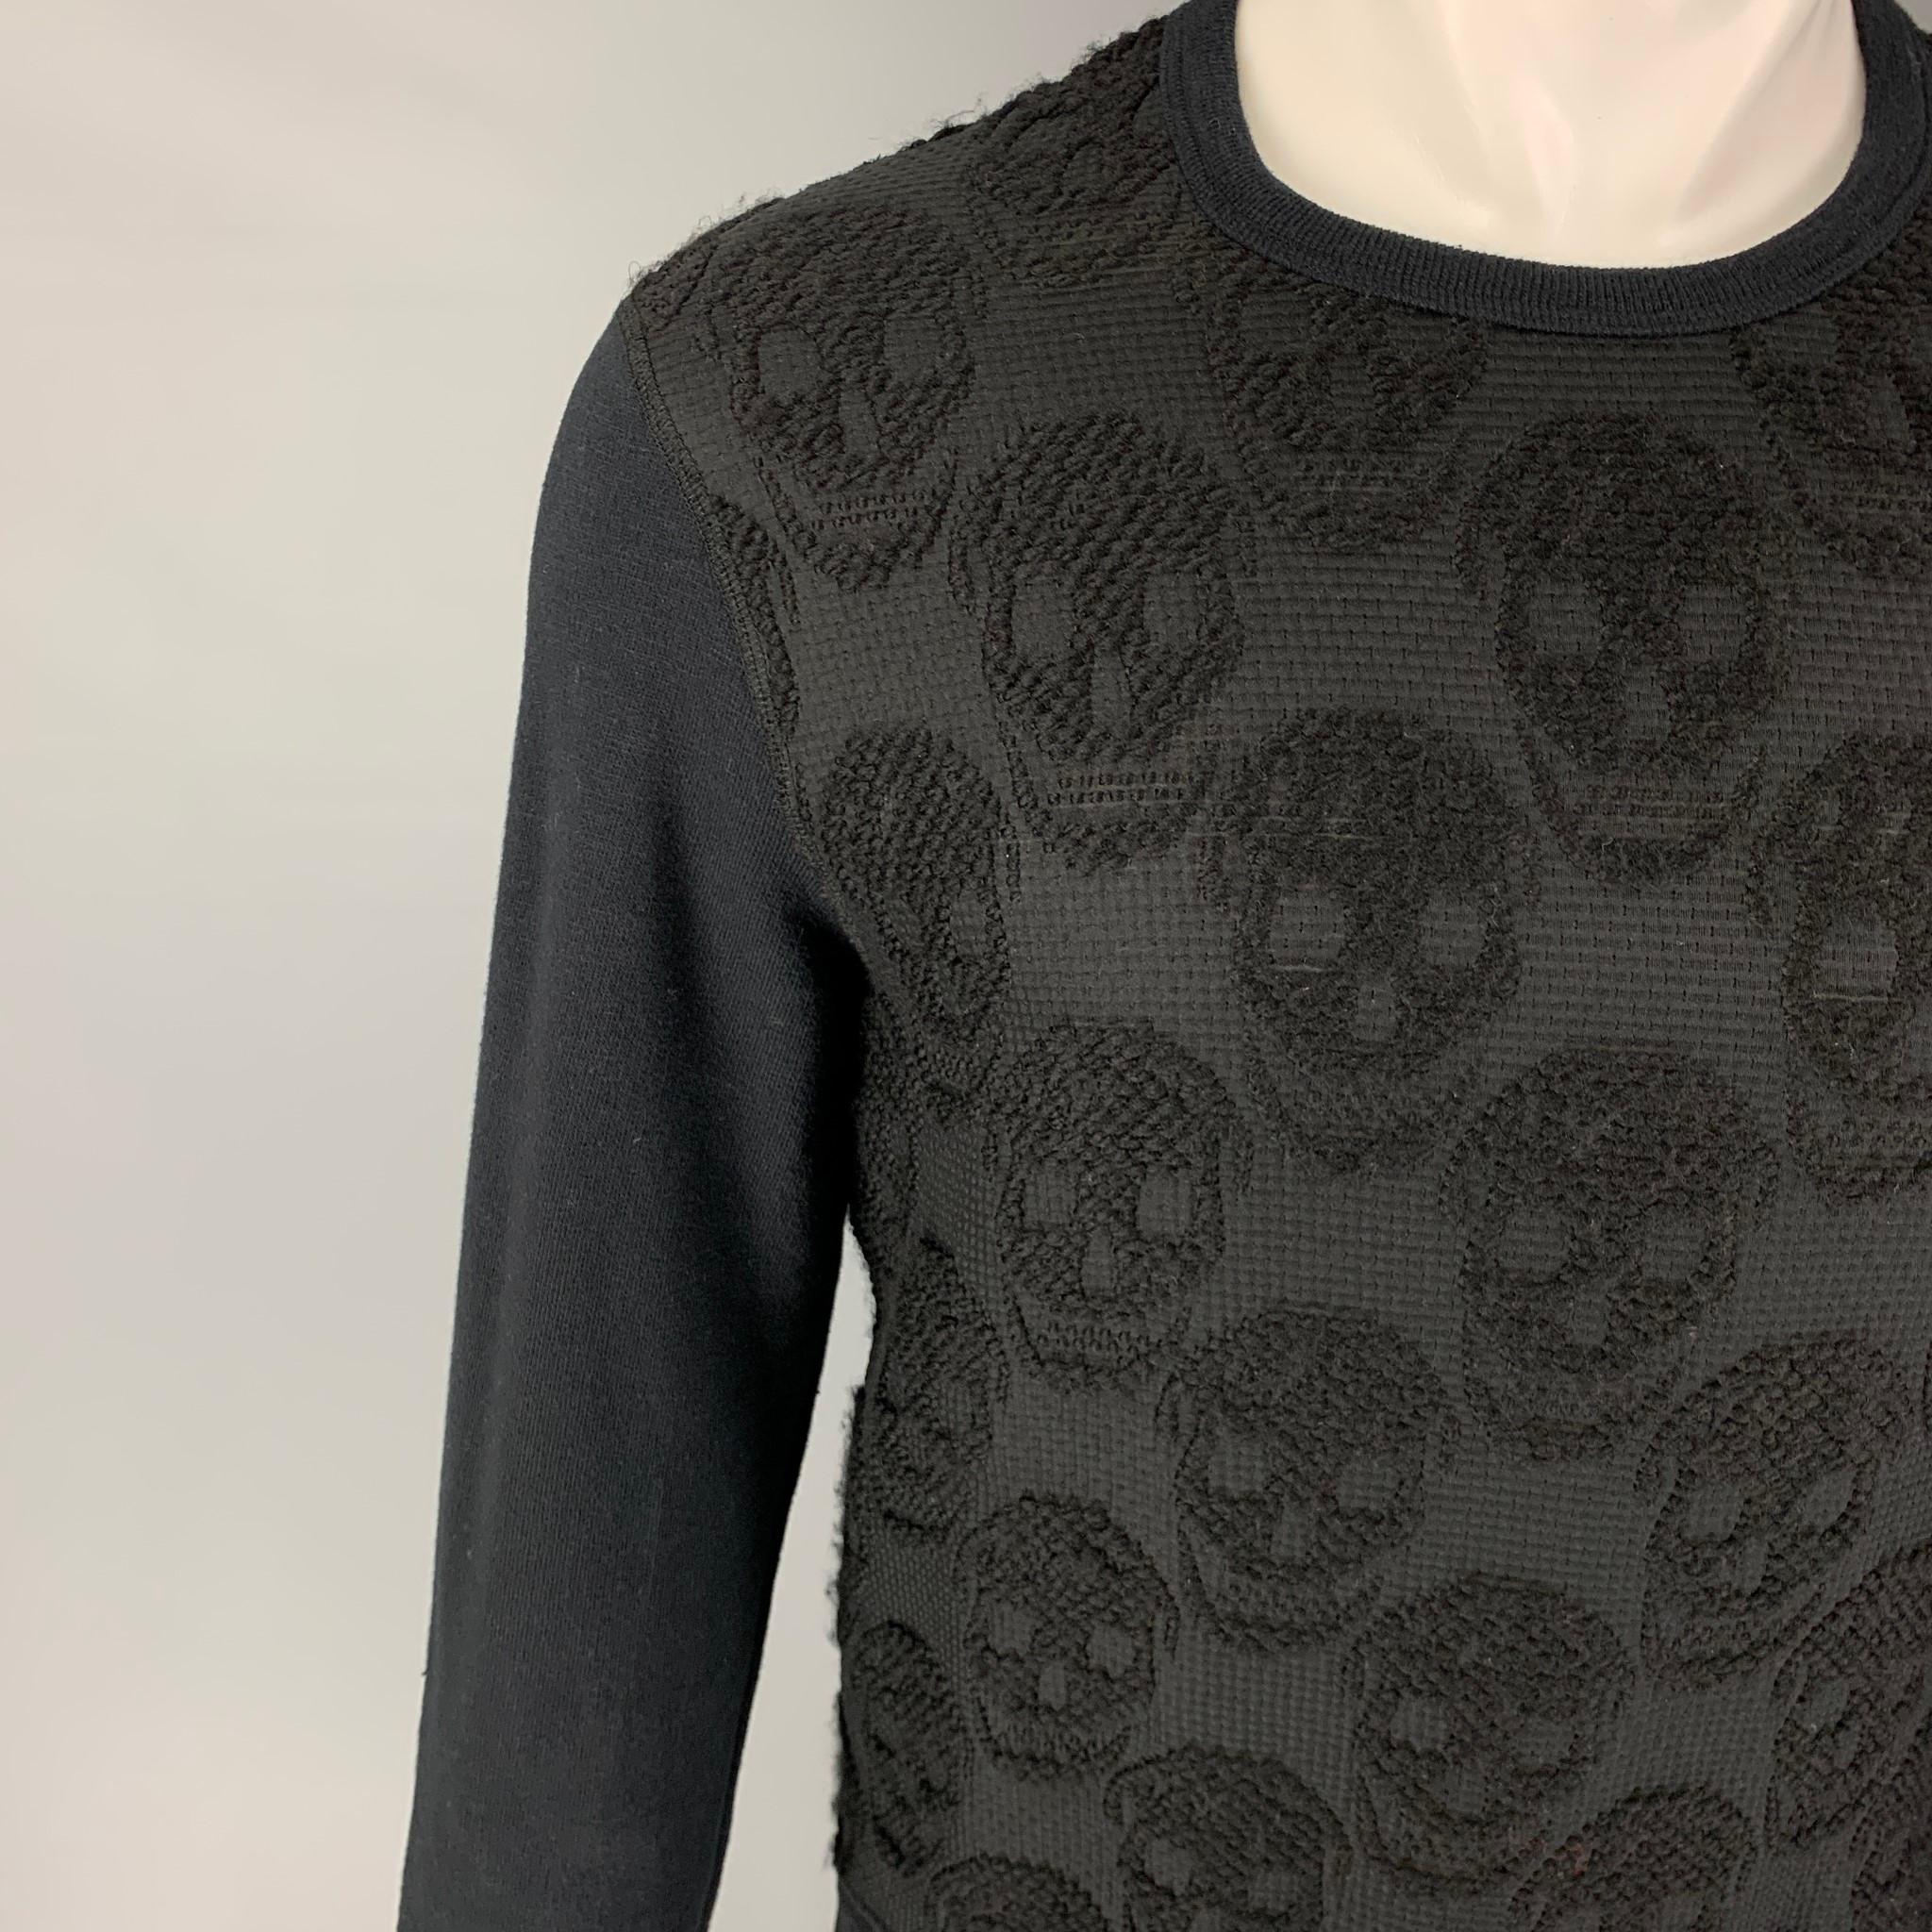 ALEXANDER McQUEEN pullover comes in a black cotton / silk featuring a skull print throughout and a crew-neck. Made in Italy. 

Excellent Pre-Owned Condition.
Marked: S

Measurements:

Shoulder: 19 in.
Chest: 38 in.
Sleeve: 26 in.
Length: 26 in.